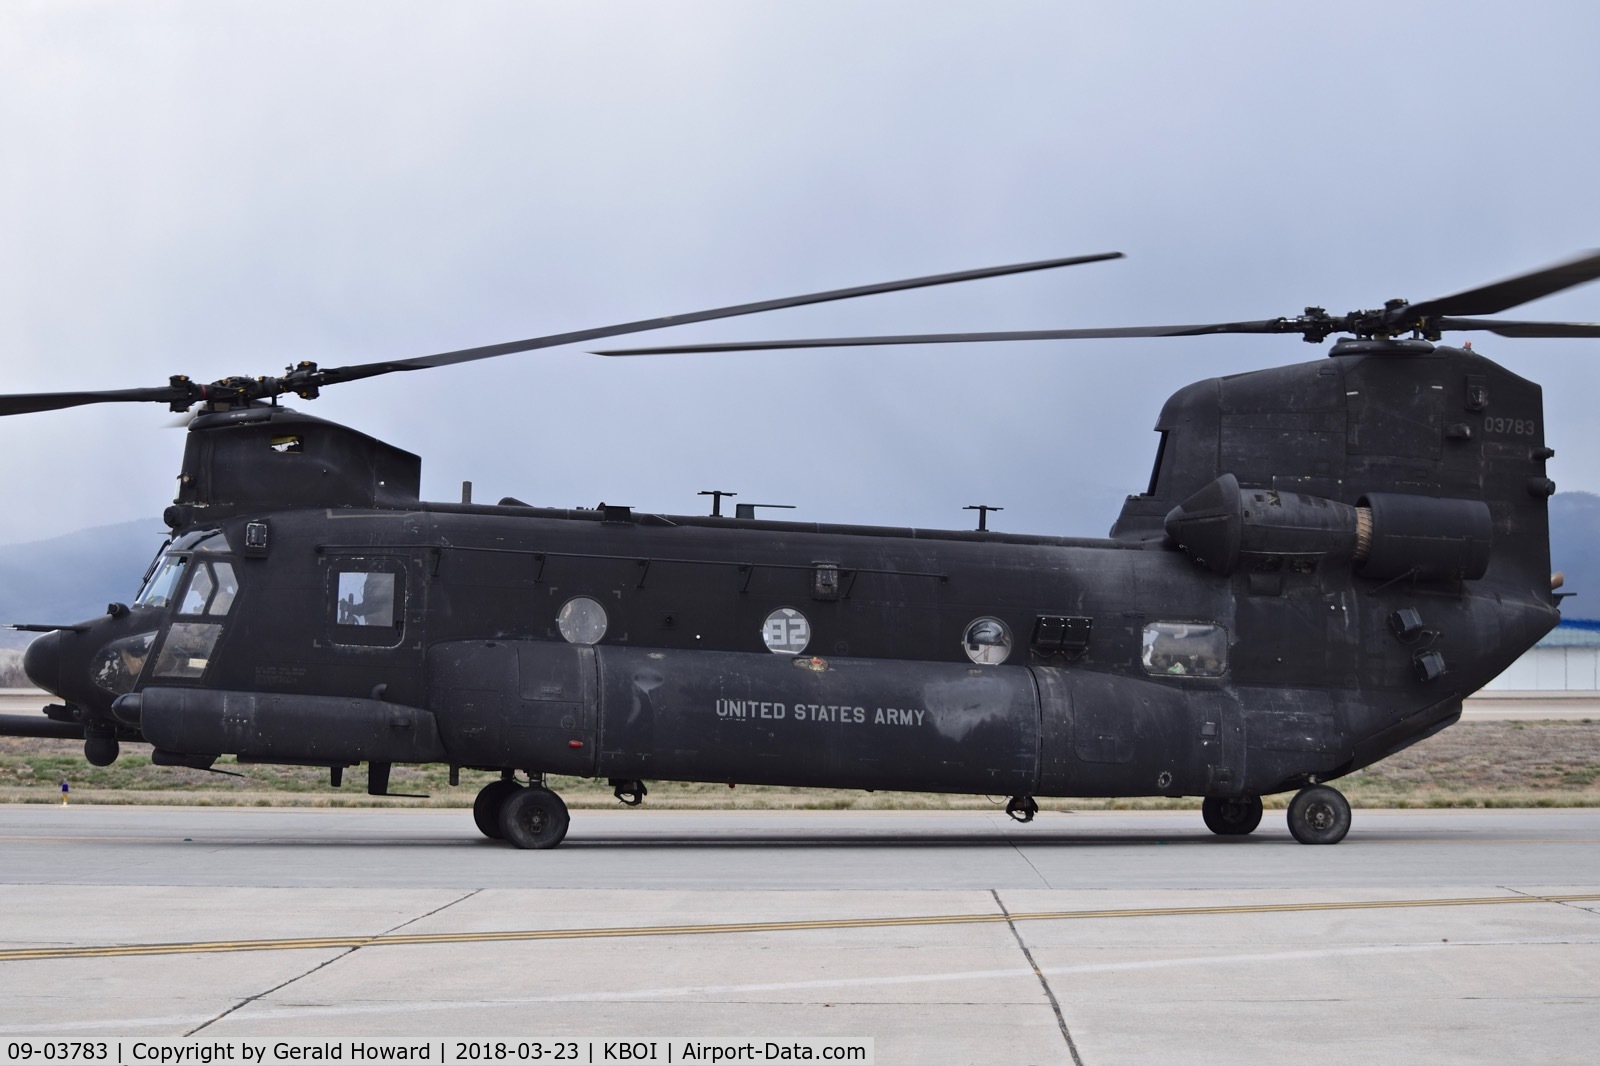 09-03783, 2009 Boeing MH-47G Chinook C/N M.3783, U.S. Army 160th Special Operations Aviation Regiment (SOAR) “Night Stalkers” 4th BN, Joint Base Lewis-McChord, WA.